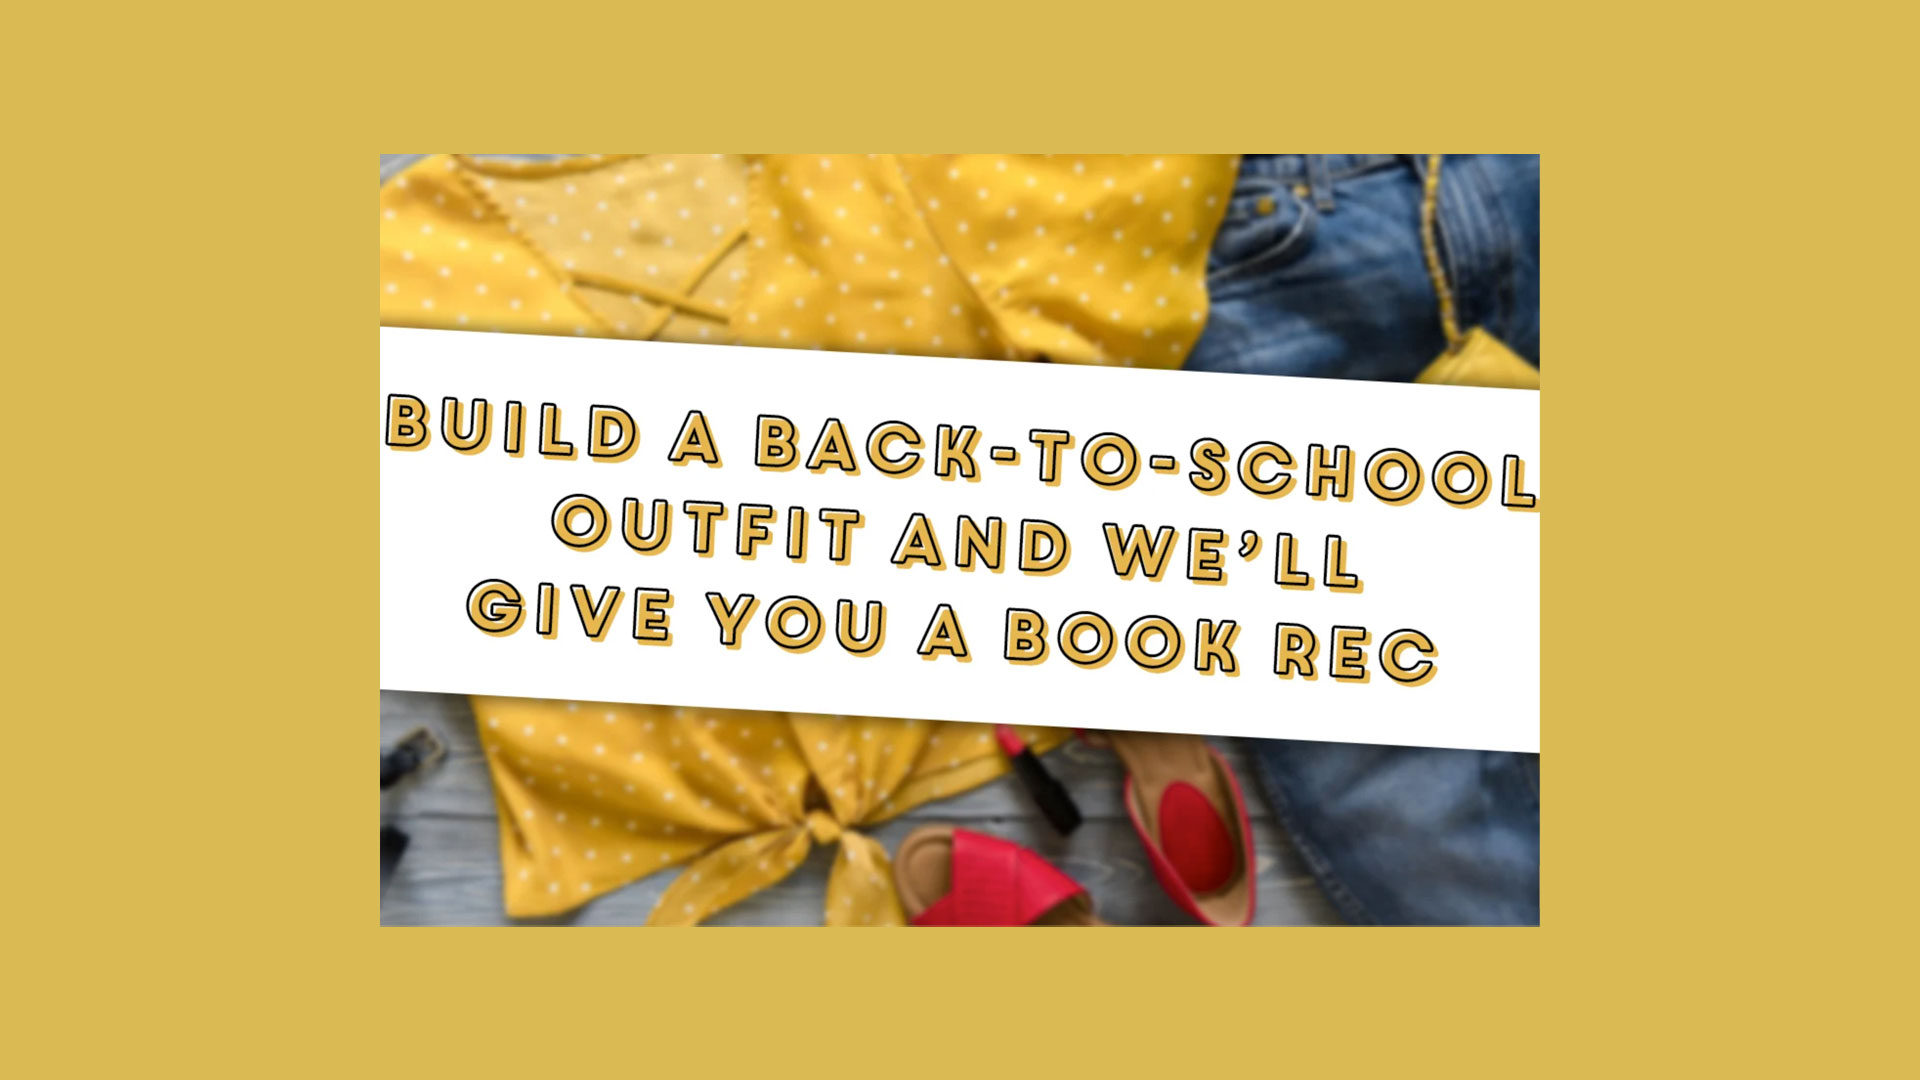 The NOVL Blog, Featured Image for Article: What to Read Based On Your Back-to-School Outfit